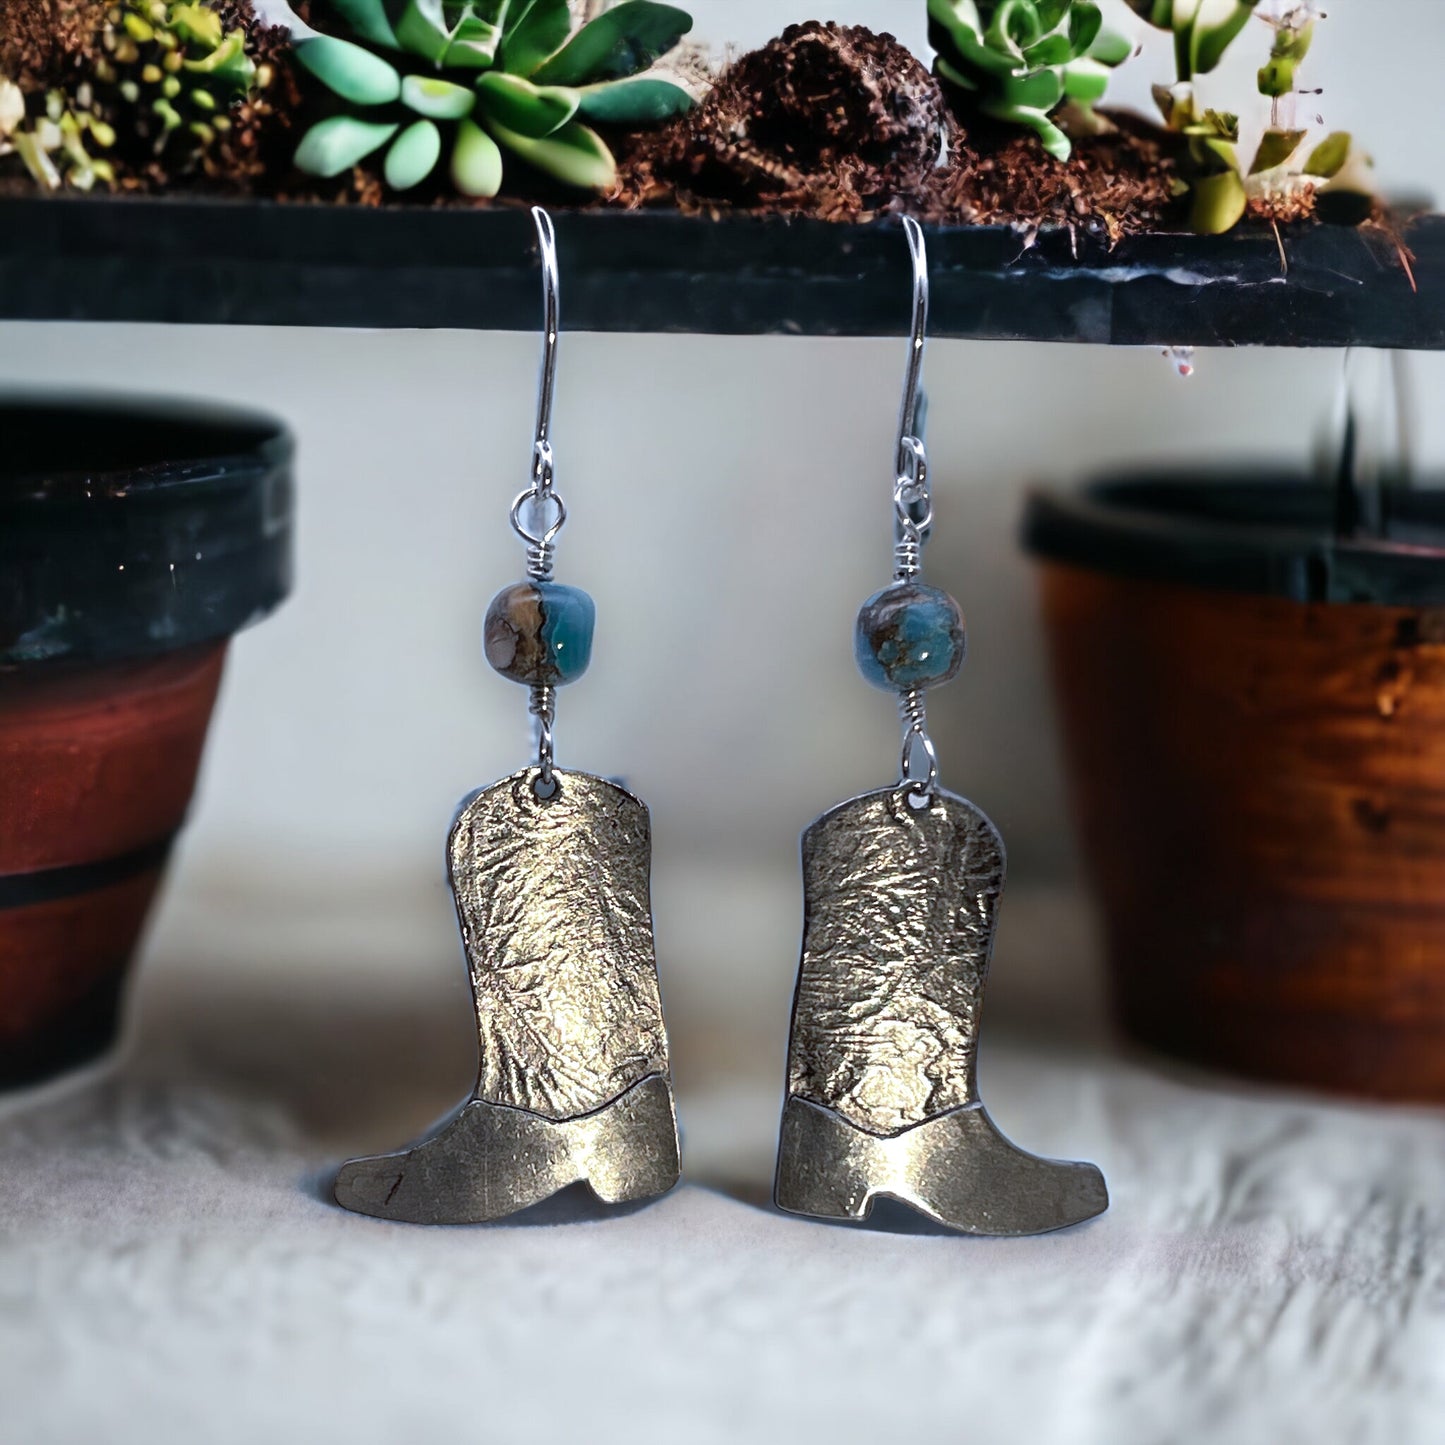 Silver Cowboy Boot earrings with turquoise beads